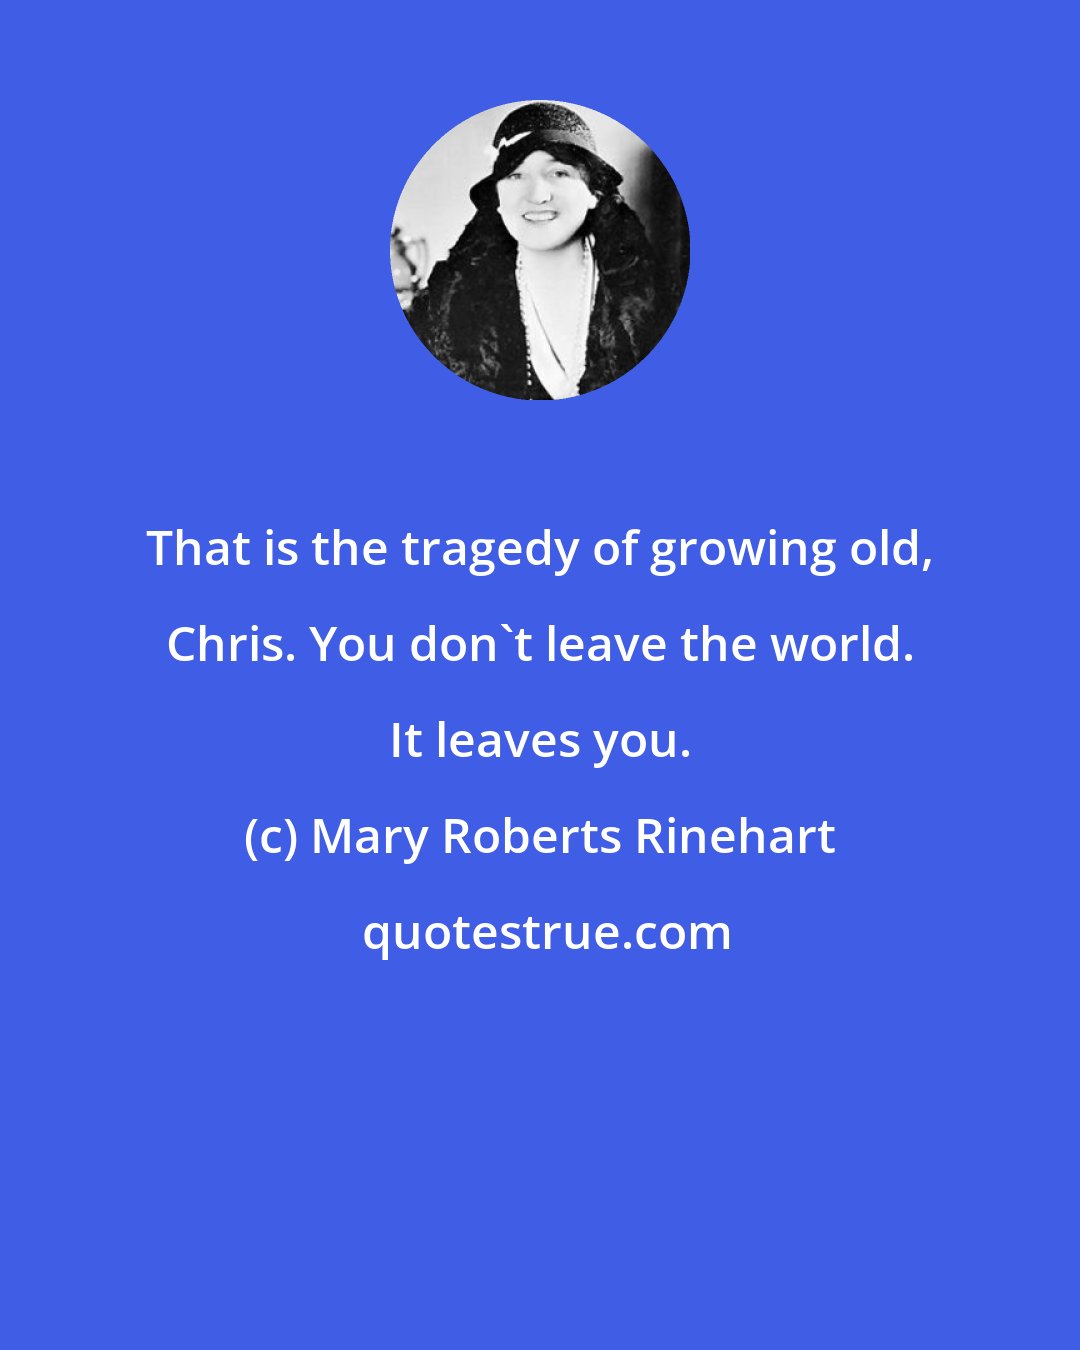 Mary Roberts Rinehart: That is the tragedy of growing old, Chris. You don't leave the world. It leaves you.